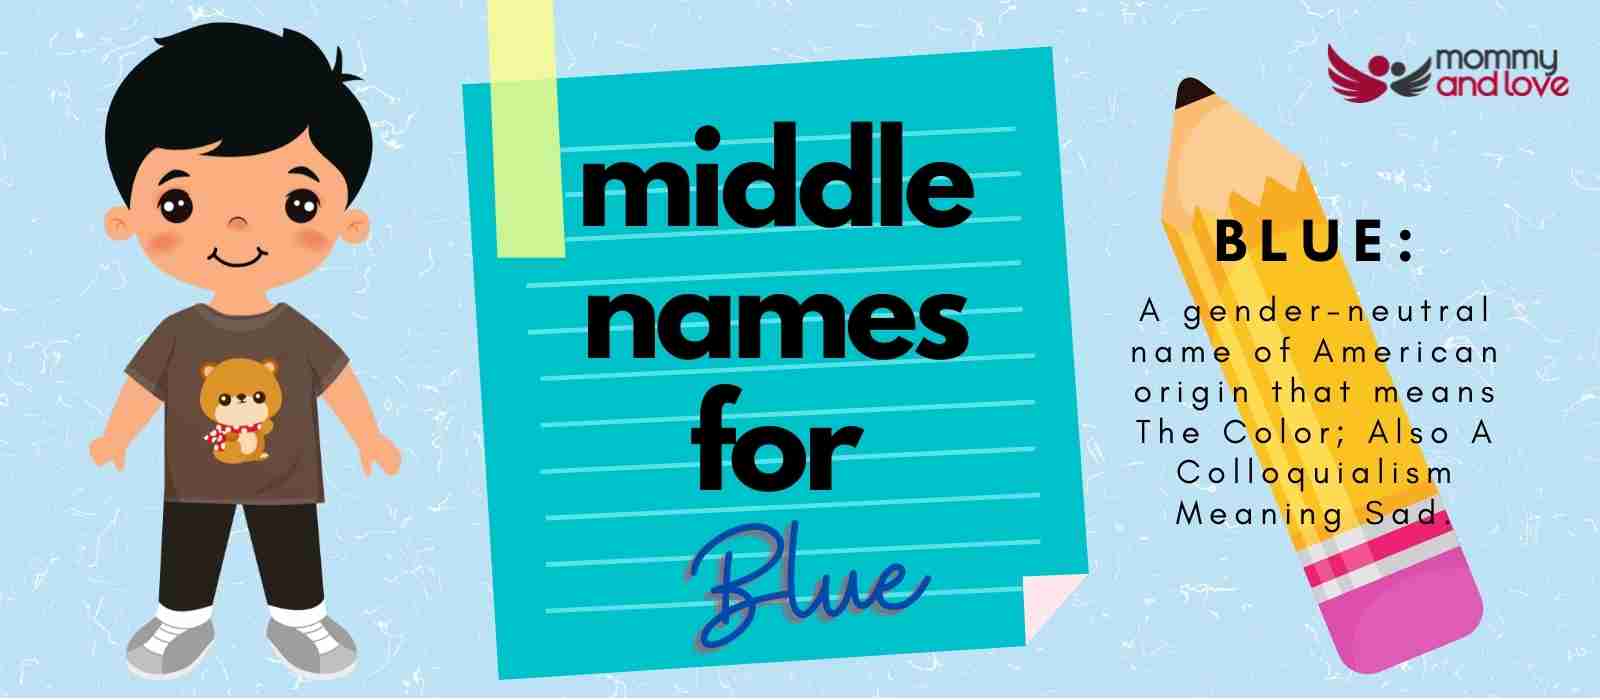 Middle Names for Blue